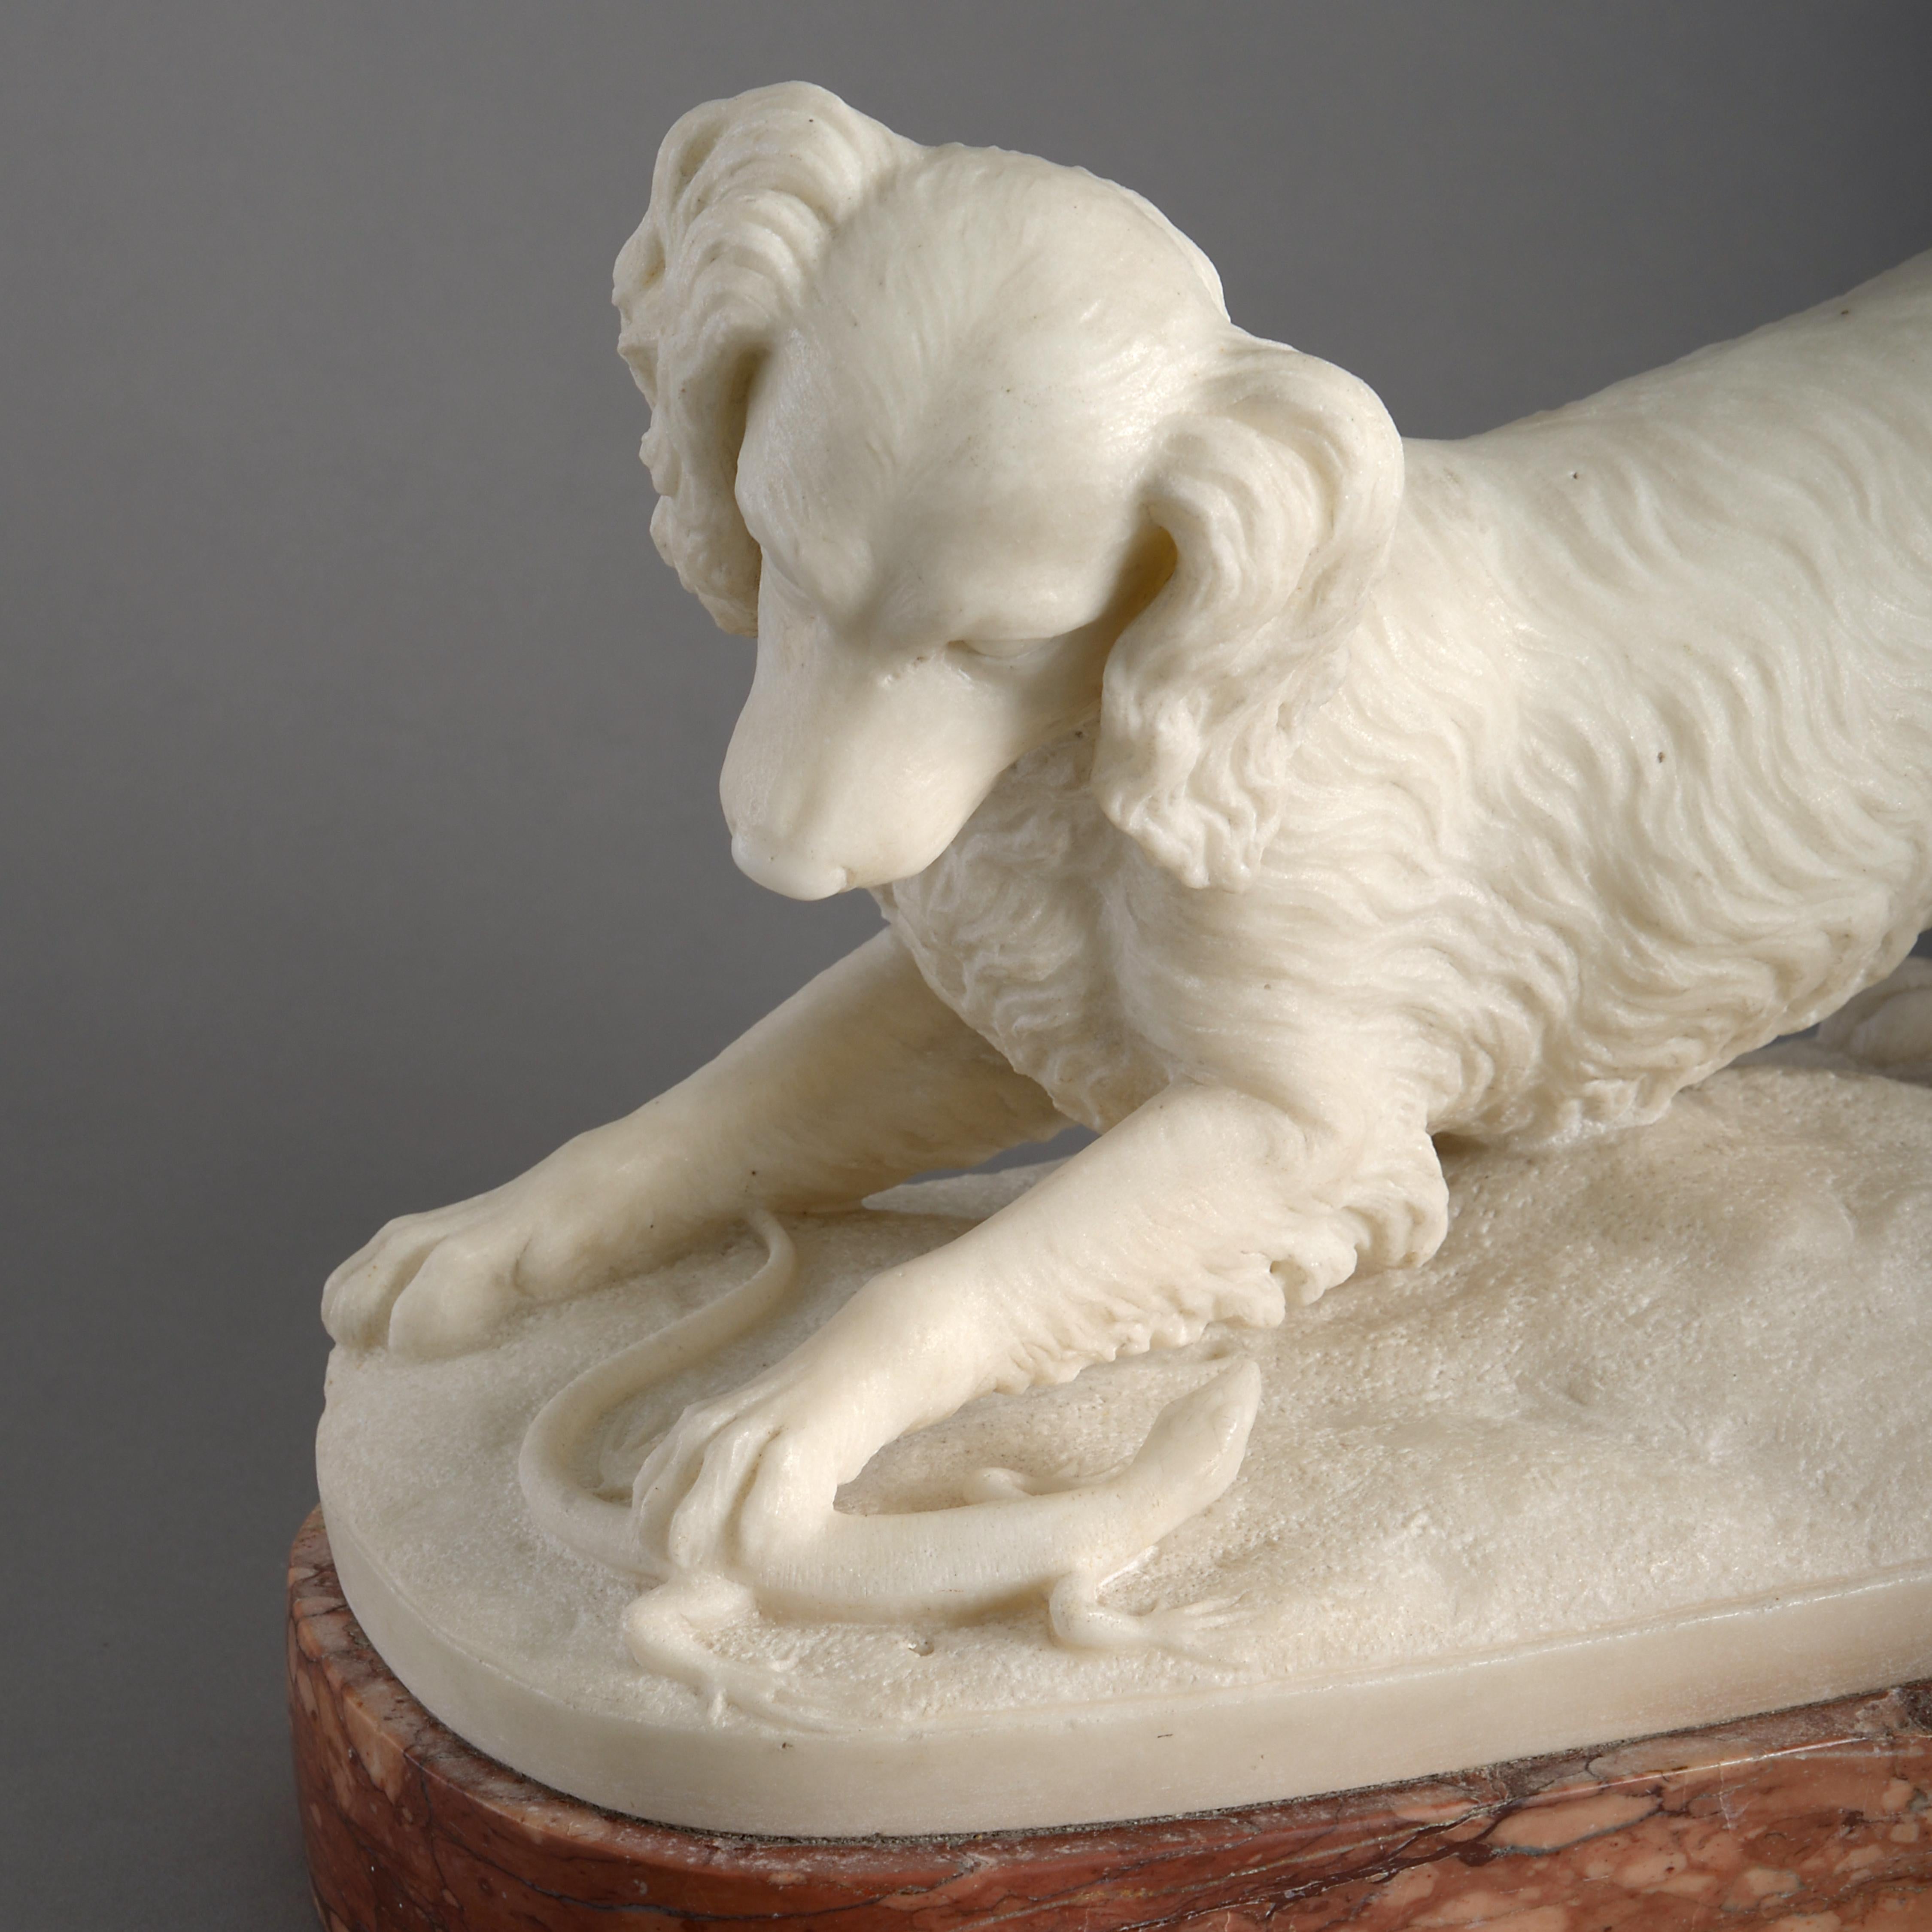 A Spaniel Pouncing on a Lizard.
Statuary marble on a Rouge de Languedoc base.
Signed ‘J. GOTT Ft’.